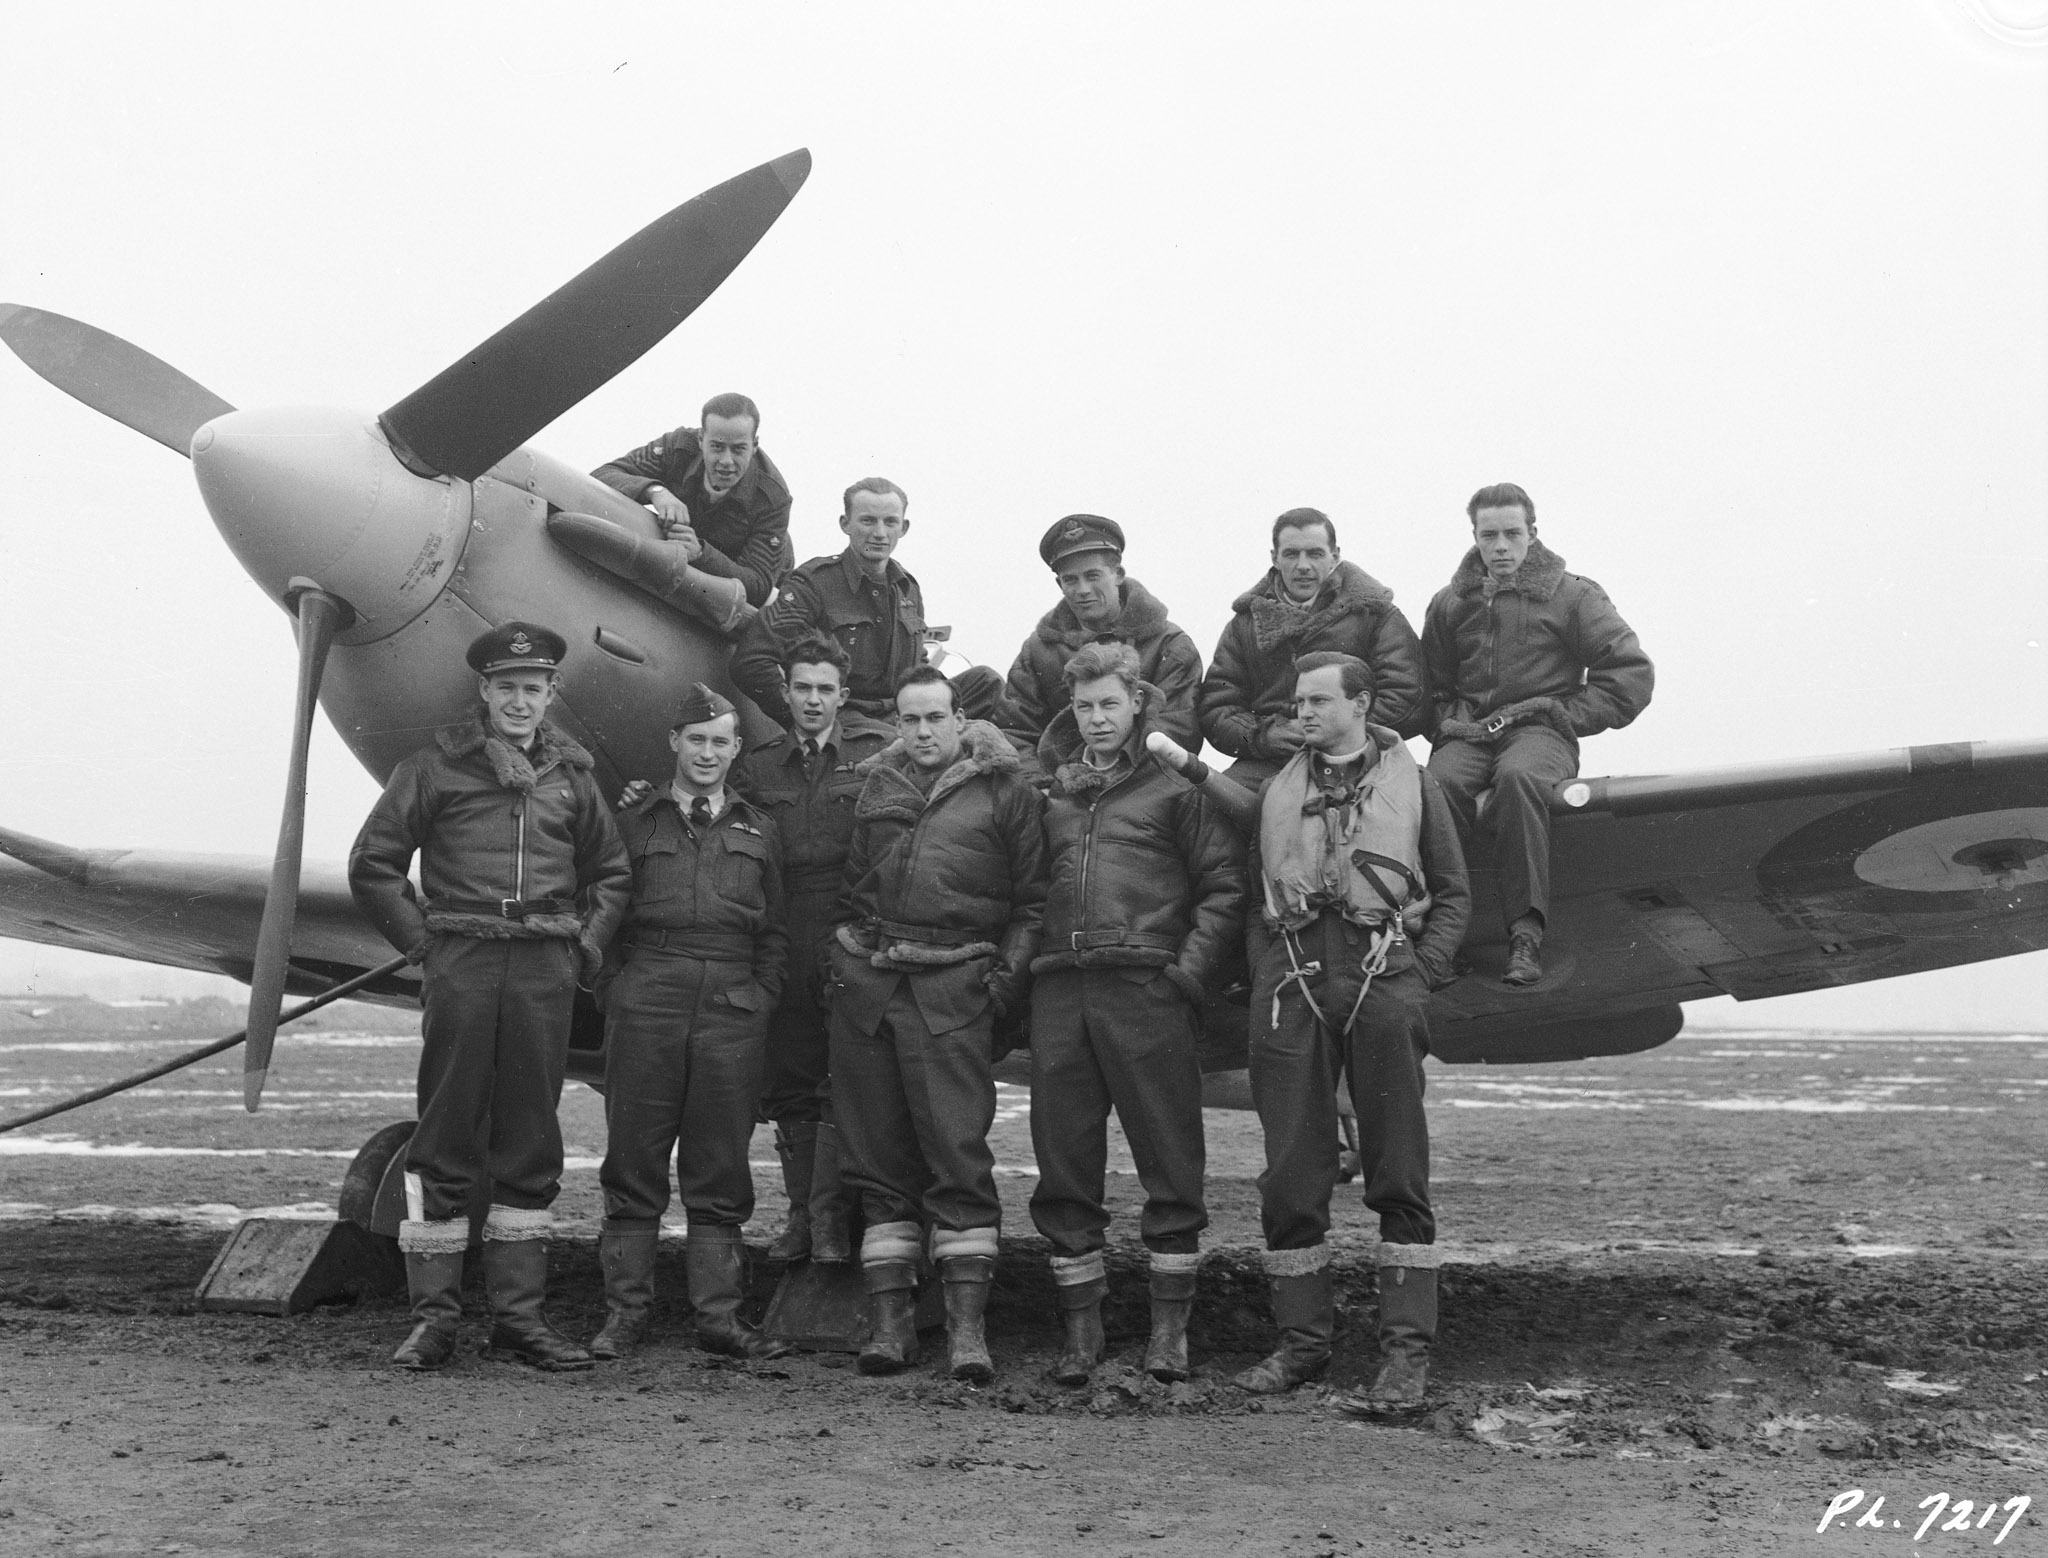 In RCAF squadrons based in Great Britain, most Spitfire aircrew were products of the British Commonwealth Air Training Plan in Canada. This photo, taken February 12, 1942, shows eleven members of 403 Squadron. Front, left: Pilot Officer J.N. Cawsey, Calgary, Alberta; Pilot Officer J.T. Parr, Barrie, Ontario; Flight Sergeant E.A. Crist, Wallaceburg, Ontario; Sergeant D.D. Connell, Hamilton, Ontario; Sergeant J.H. Oliver, Toronto, Ontario; and Sergeant H.R. Olmsted, Ottawa, Ontario. Back, left: Flight Sergeant J.B. Rainville, St. Johns, Quebec; Flight Sergeant A.H. McDonald, Fleming, Saskatchewan; Pilot Officer D.S. Hurst, Winnipeg, Manitoba; Flight Sergeant F.H. Belcher, Roblin, Manitoba; and Flight Sergeant G.A.J. Ryckman, London, Ontario. PHOTO: DND Archives, 